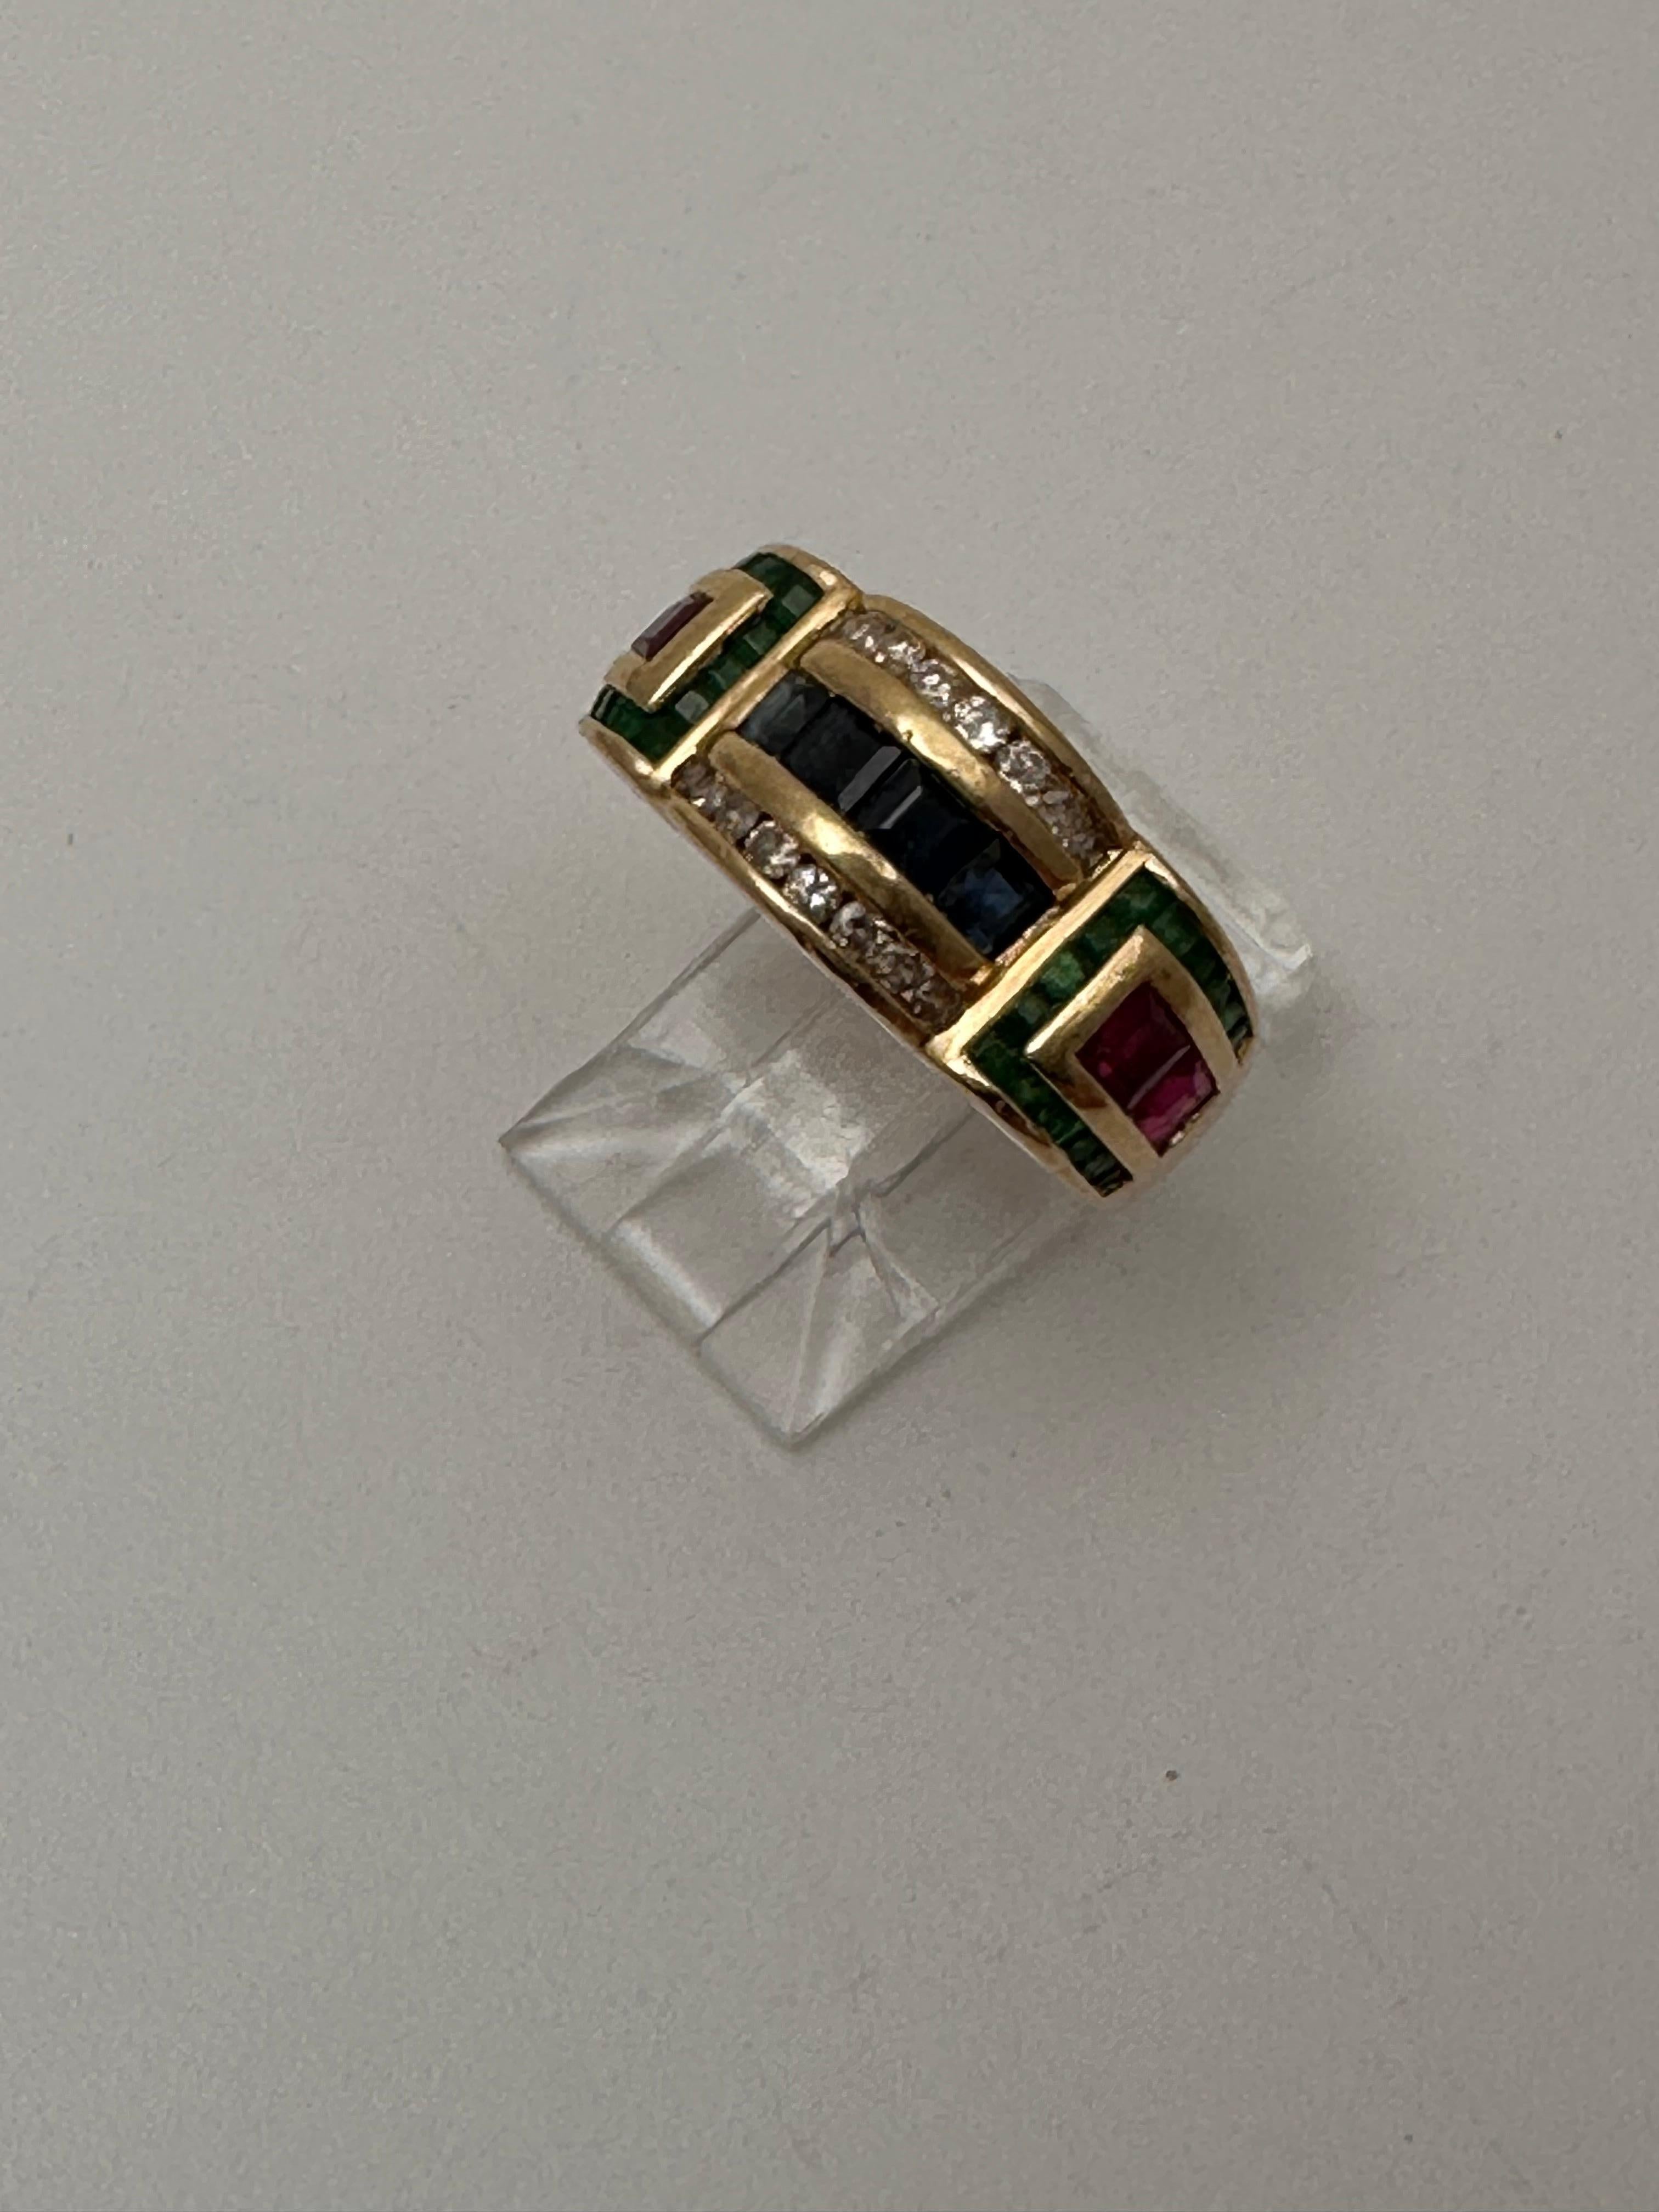 14k Yellow Gold 9 mm Wide Ruby Sapphire Diamond and Emerald Ring Size 7. Colored stones are princess cut and round diamonds.
RUBY
This vibrant, gem-like baby name is often associated with wealth, health, passion, and success in love, and derives